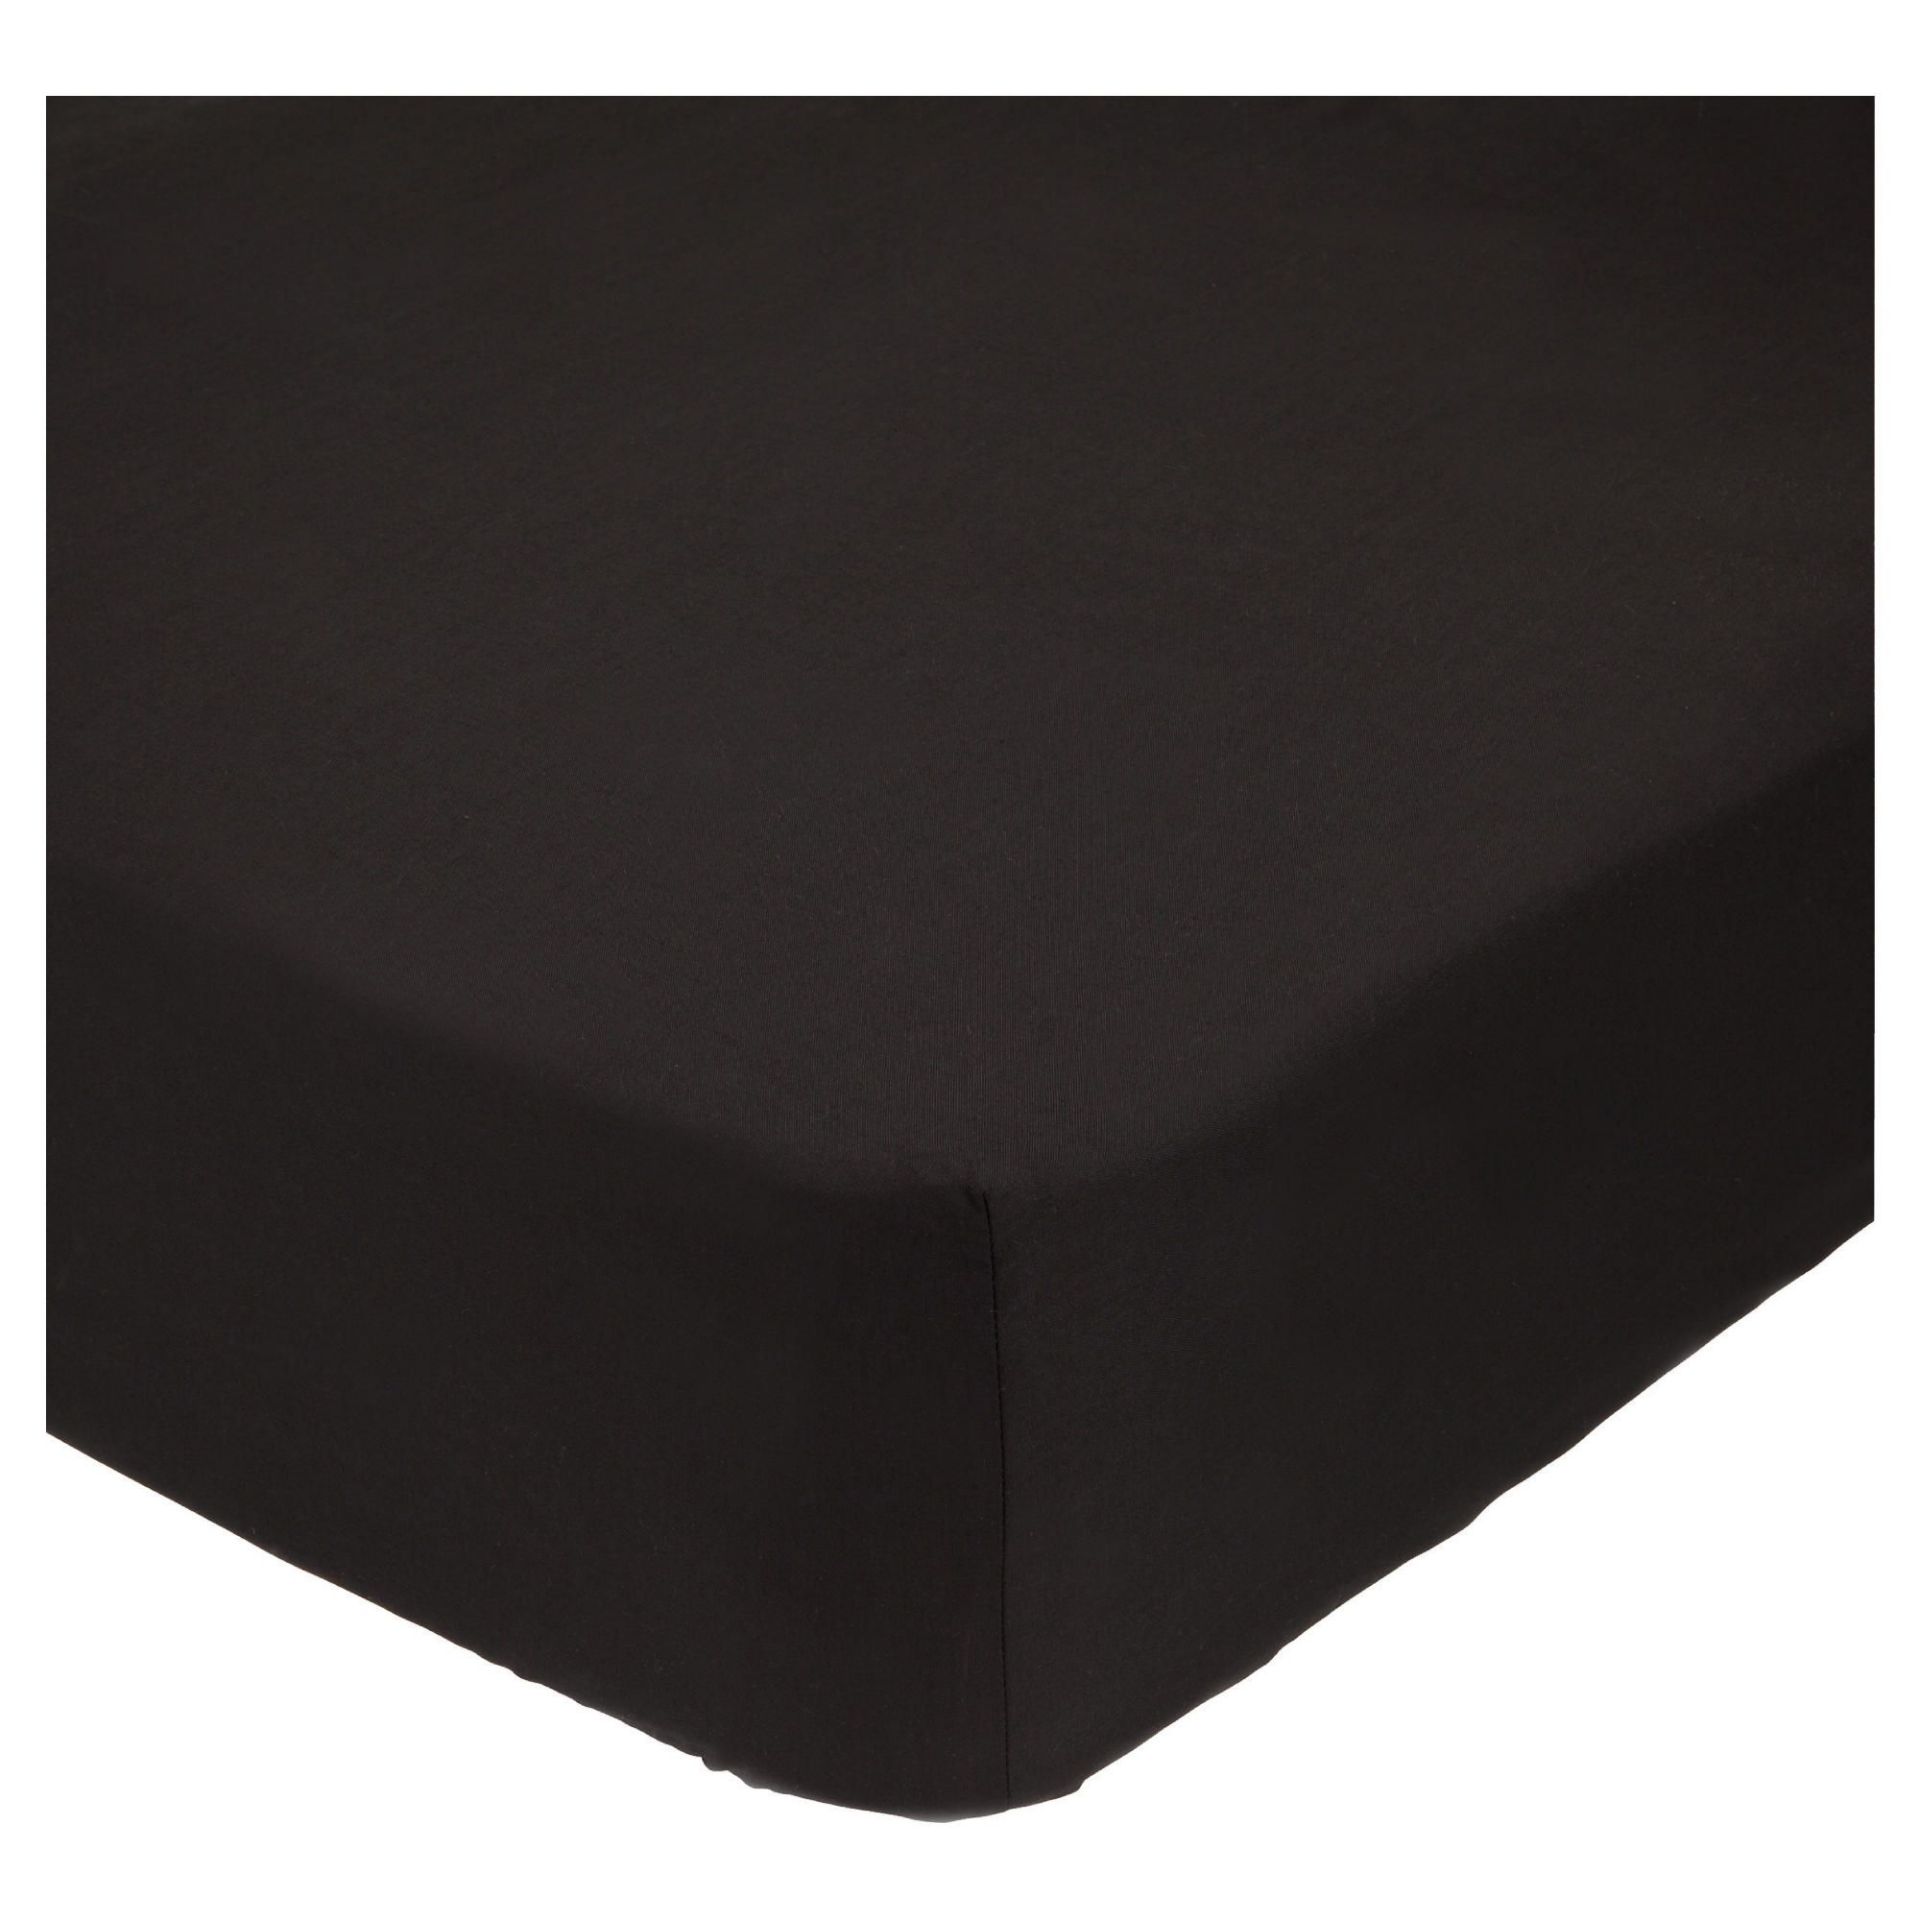 V Brand New Luxury Egyptian Single Fitted Sheet - Black X 2 YOUR BID PRICE TO BE MULTIPLIED BY TWO